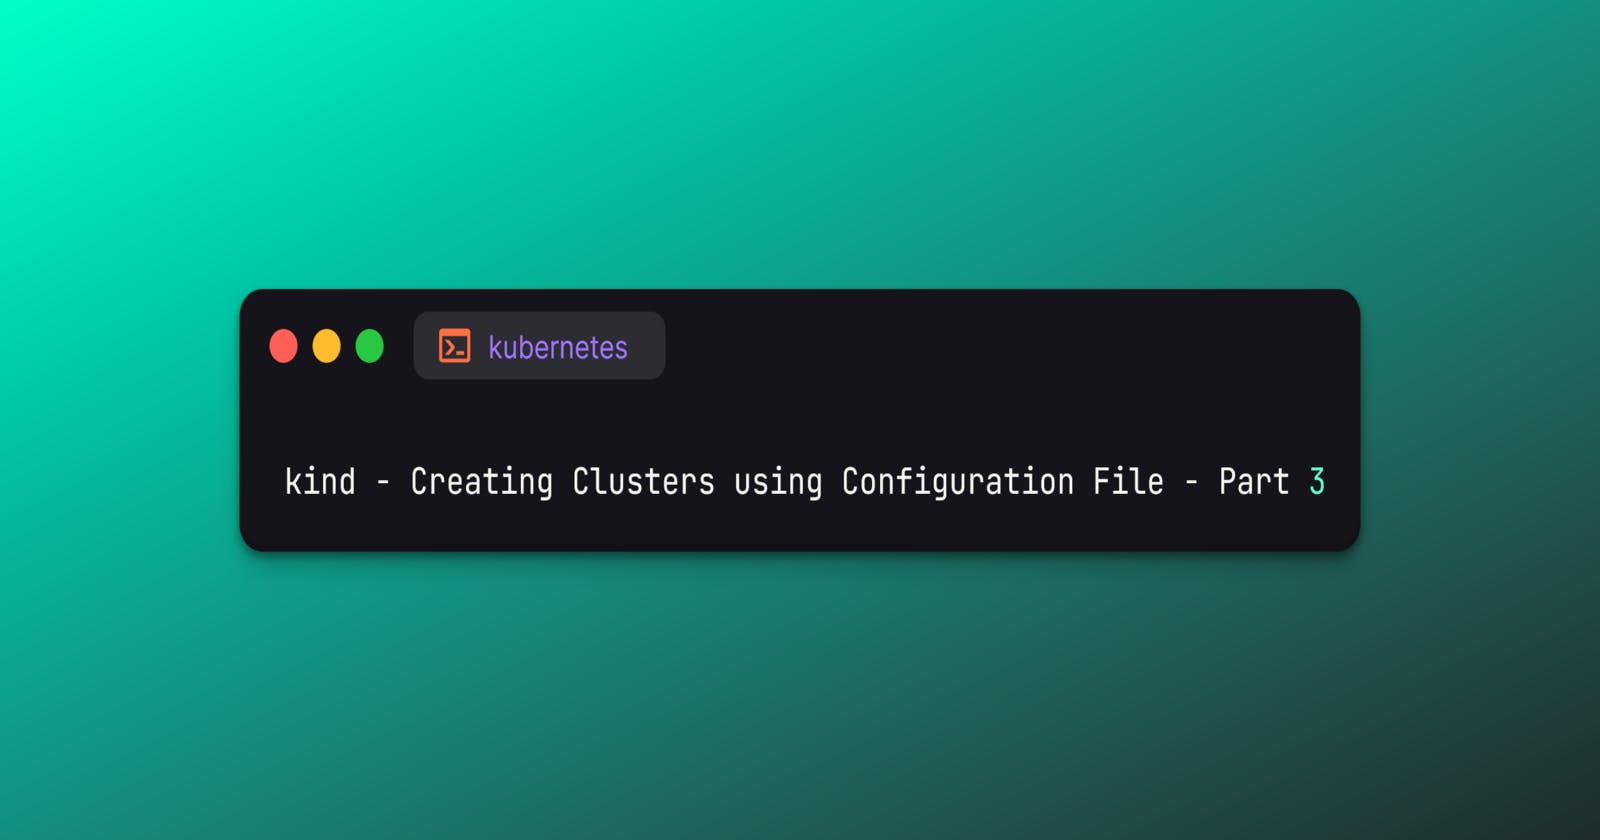 kind - Creating Clusters using Configuration File - Part 3